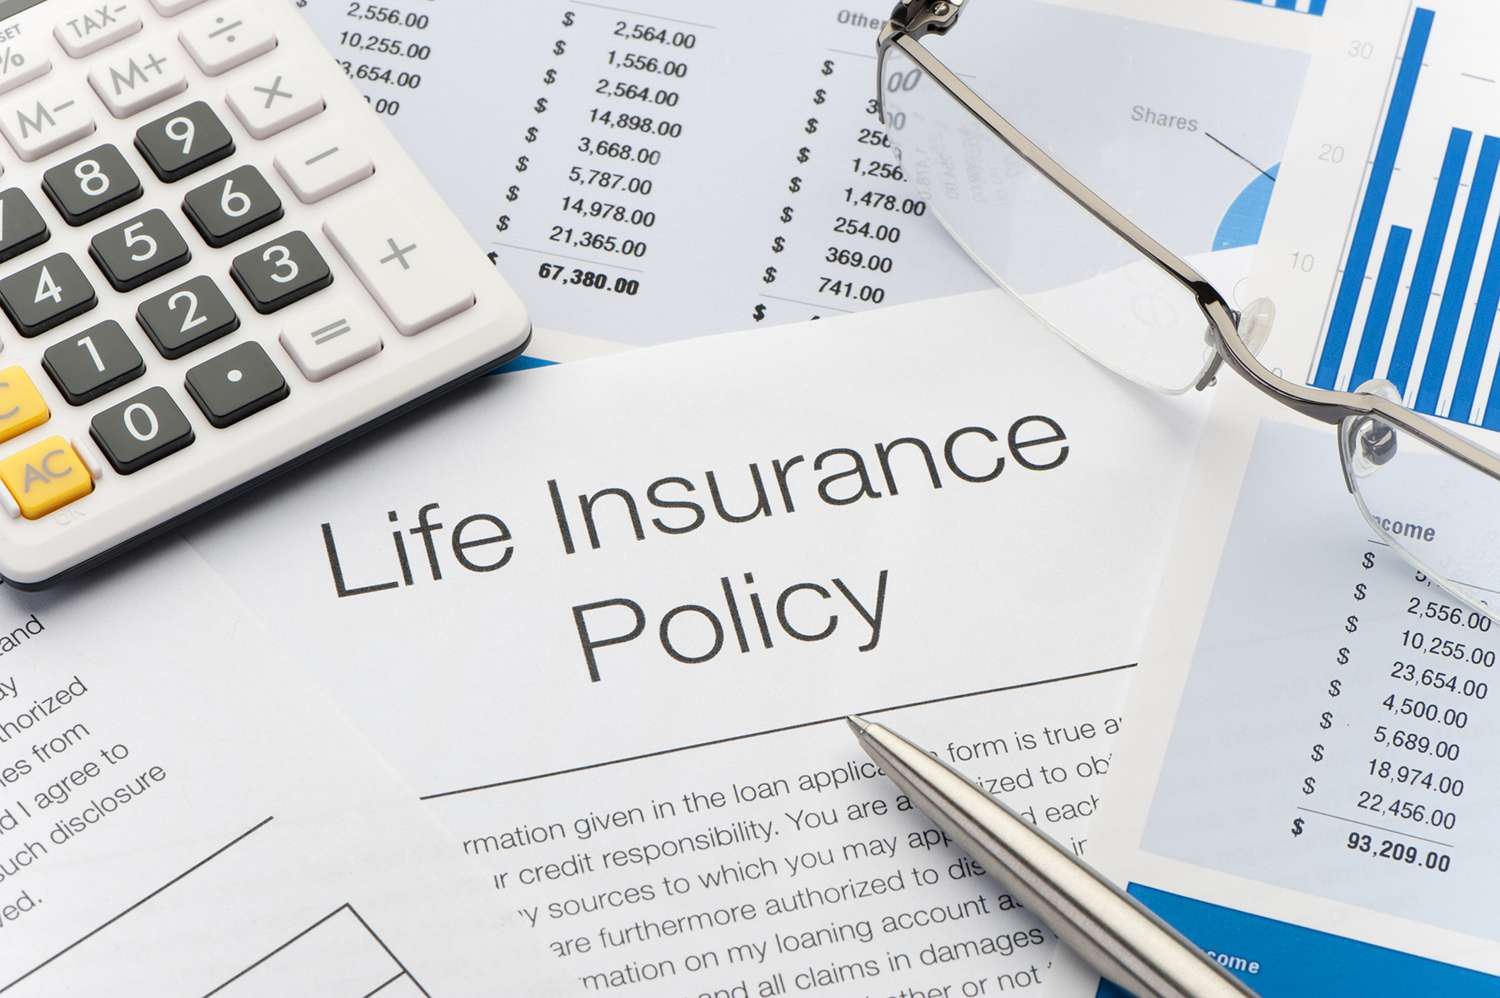 Why Is A Life Insurance Policy Delivery Date Important?